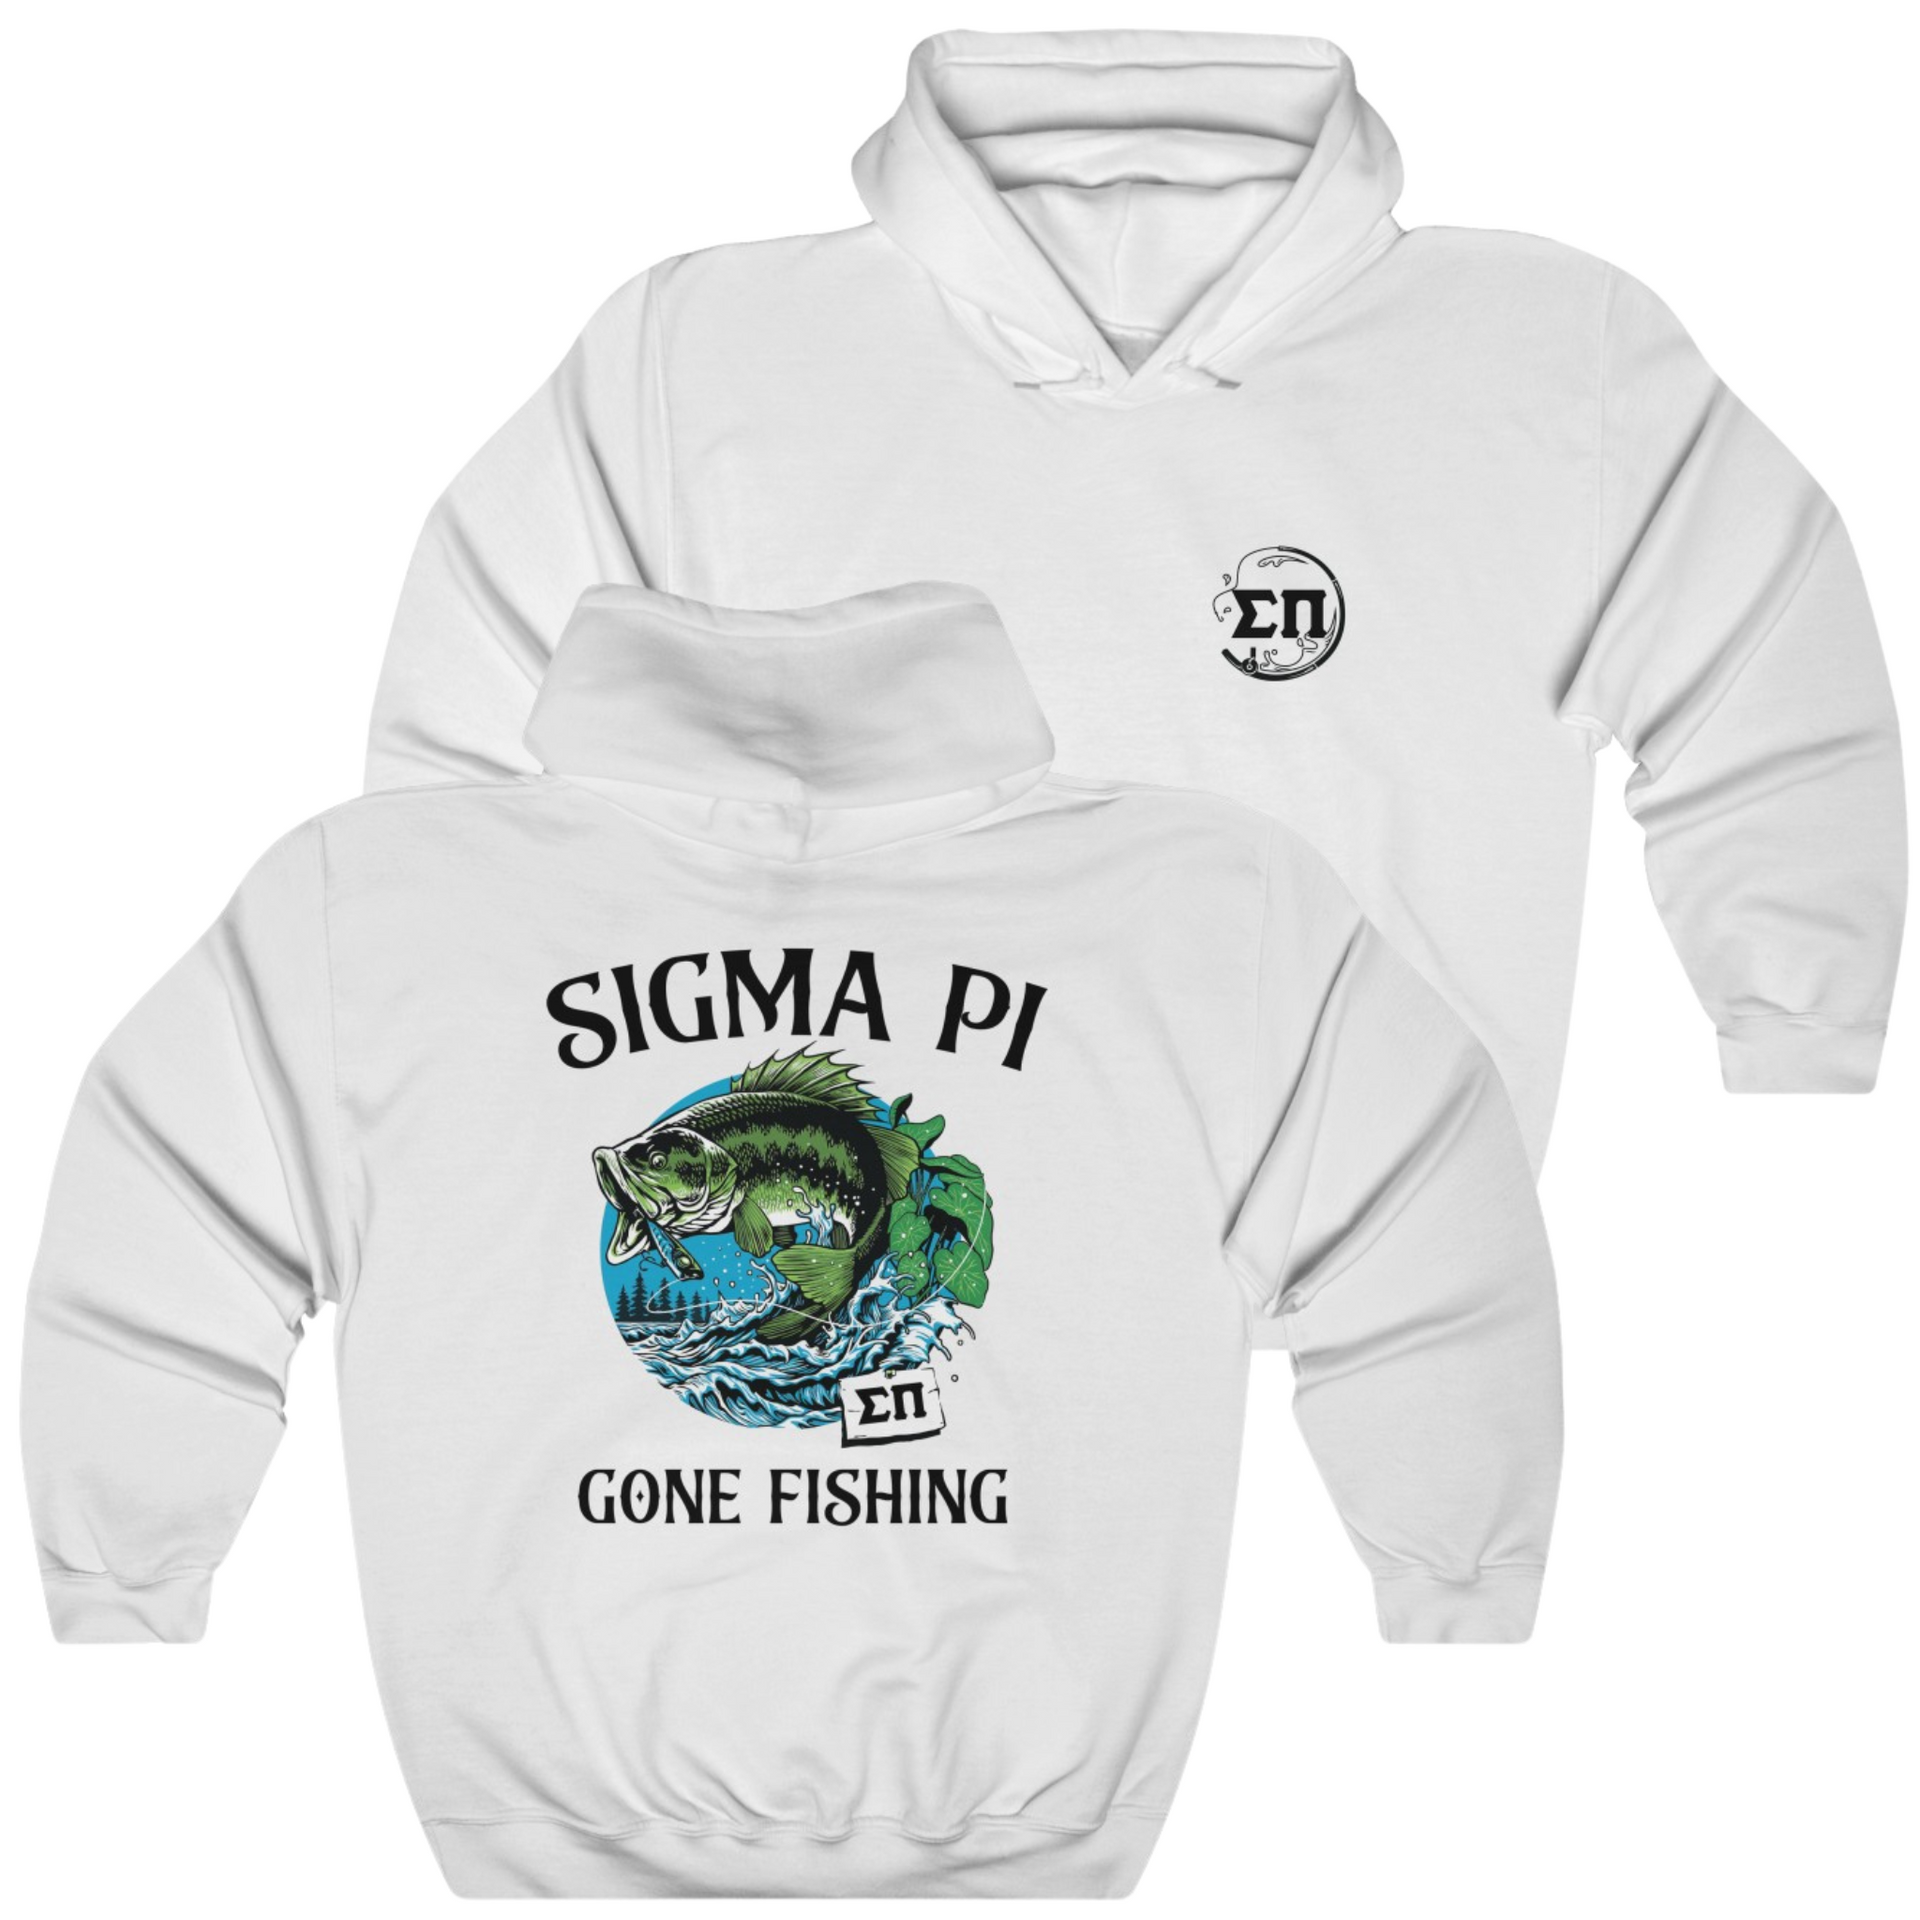 White Sigma Pi Graphic Hoodie | Gone Fishing | Sigma Pi Apparel and Merchandise